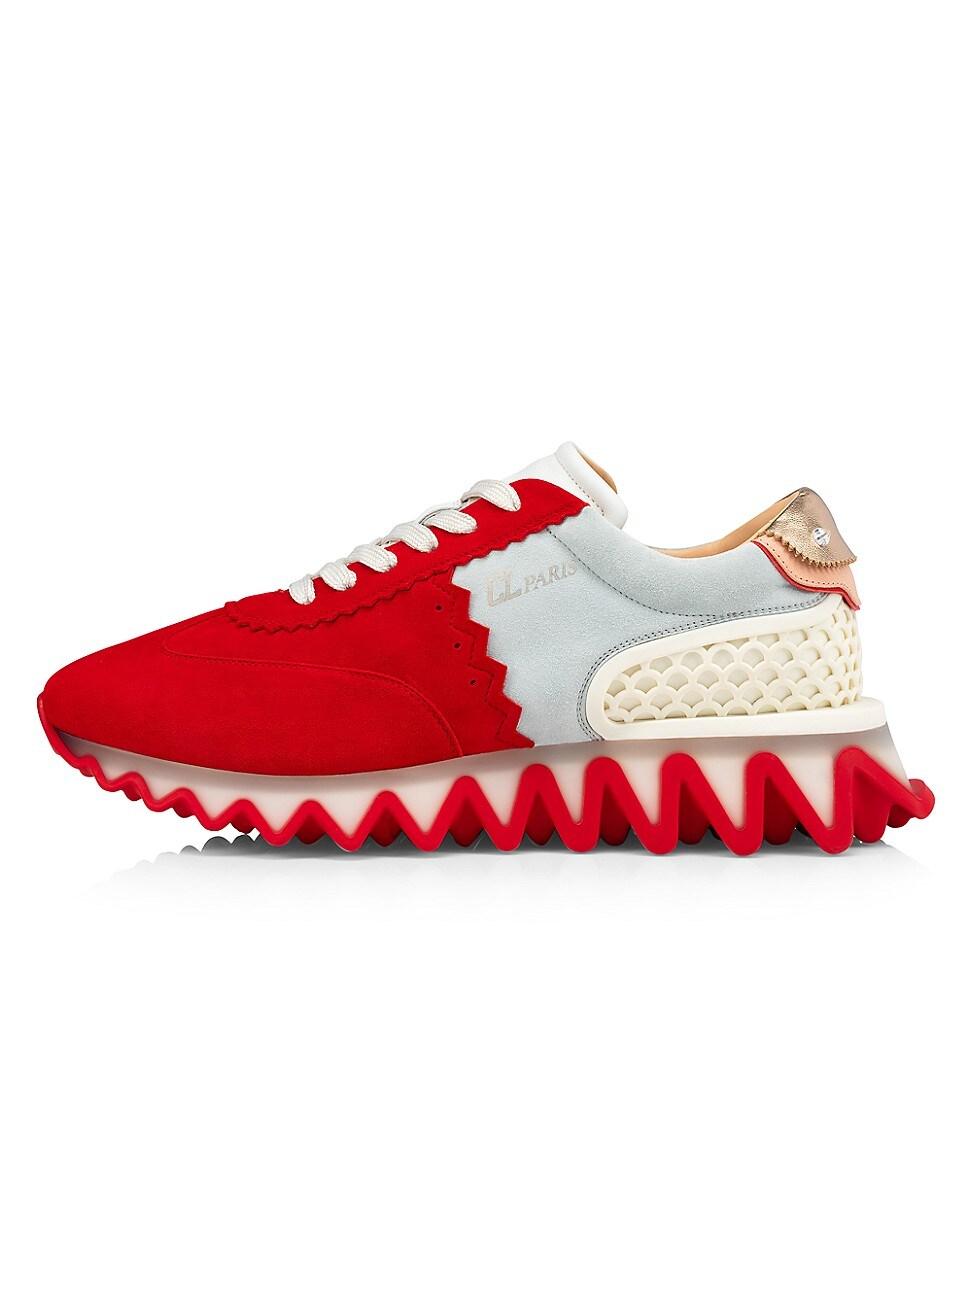 Loubishark Suede Sneakers in Red - Christian Louboutin